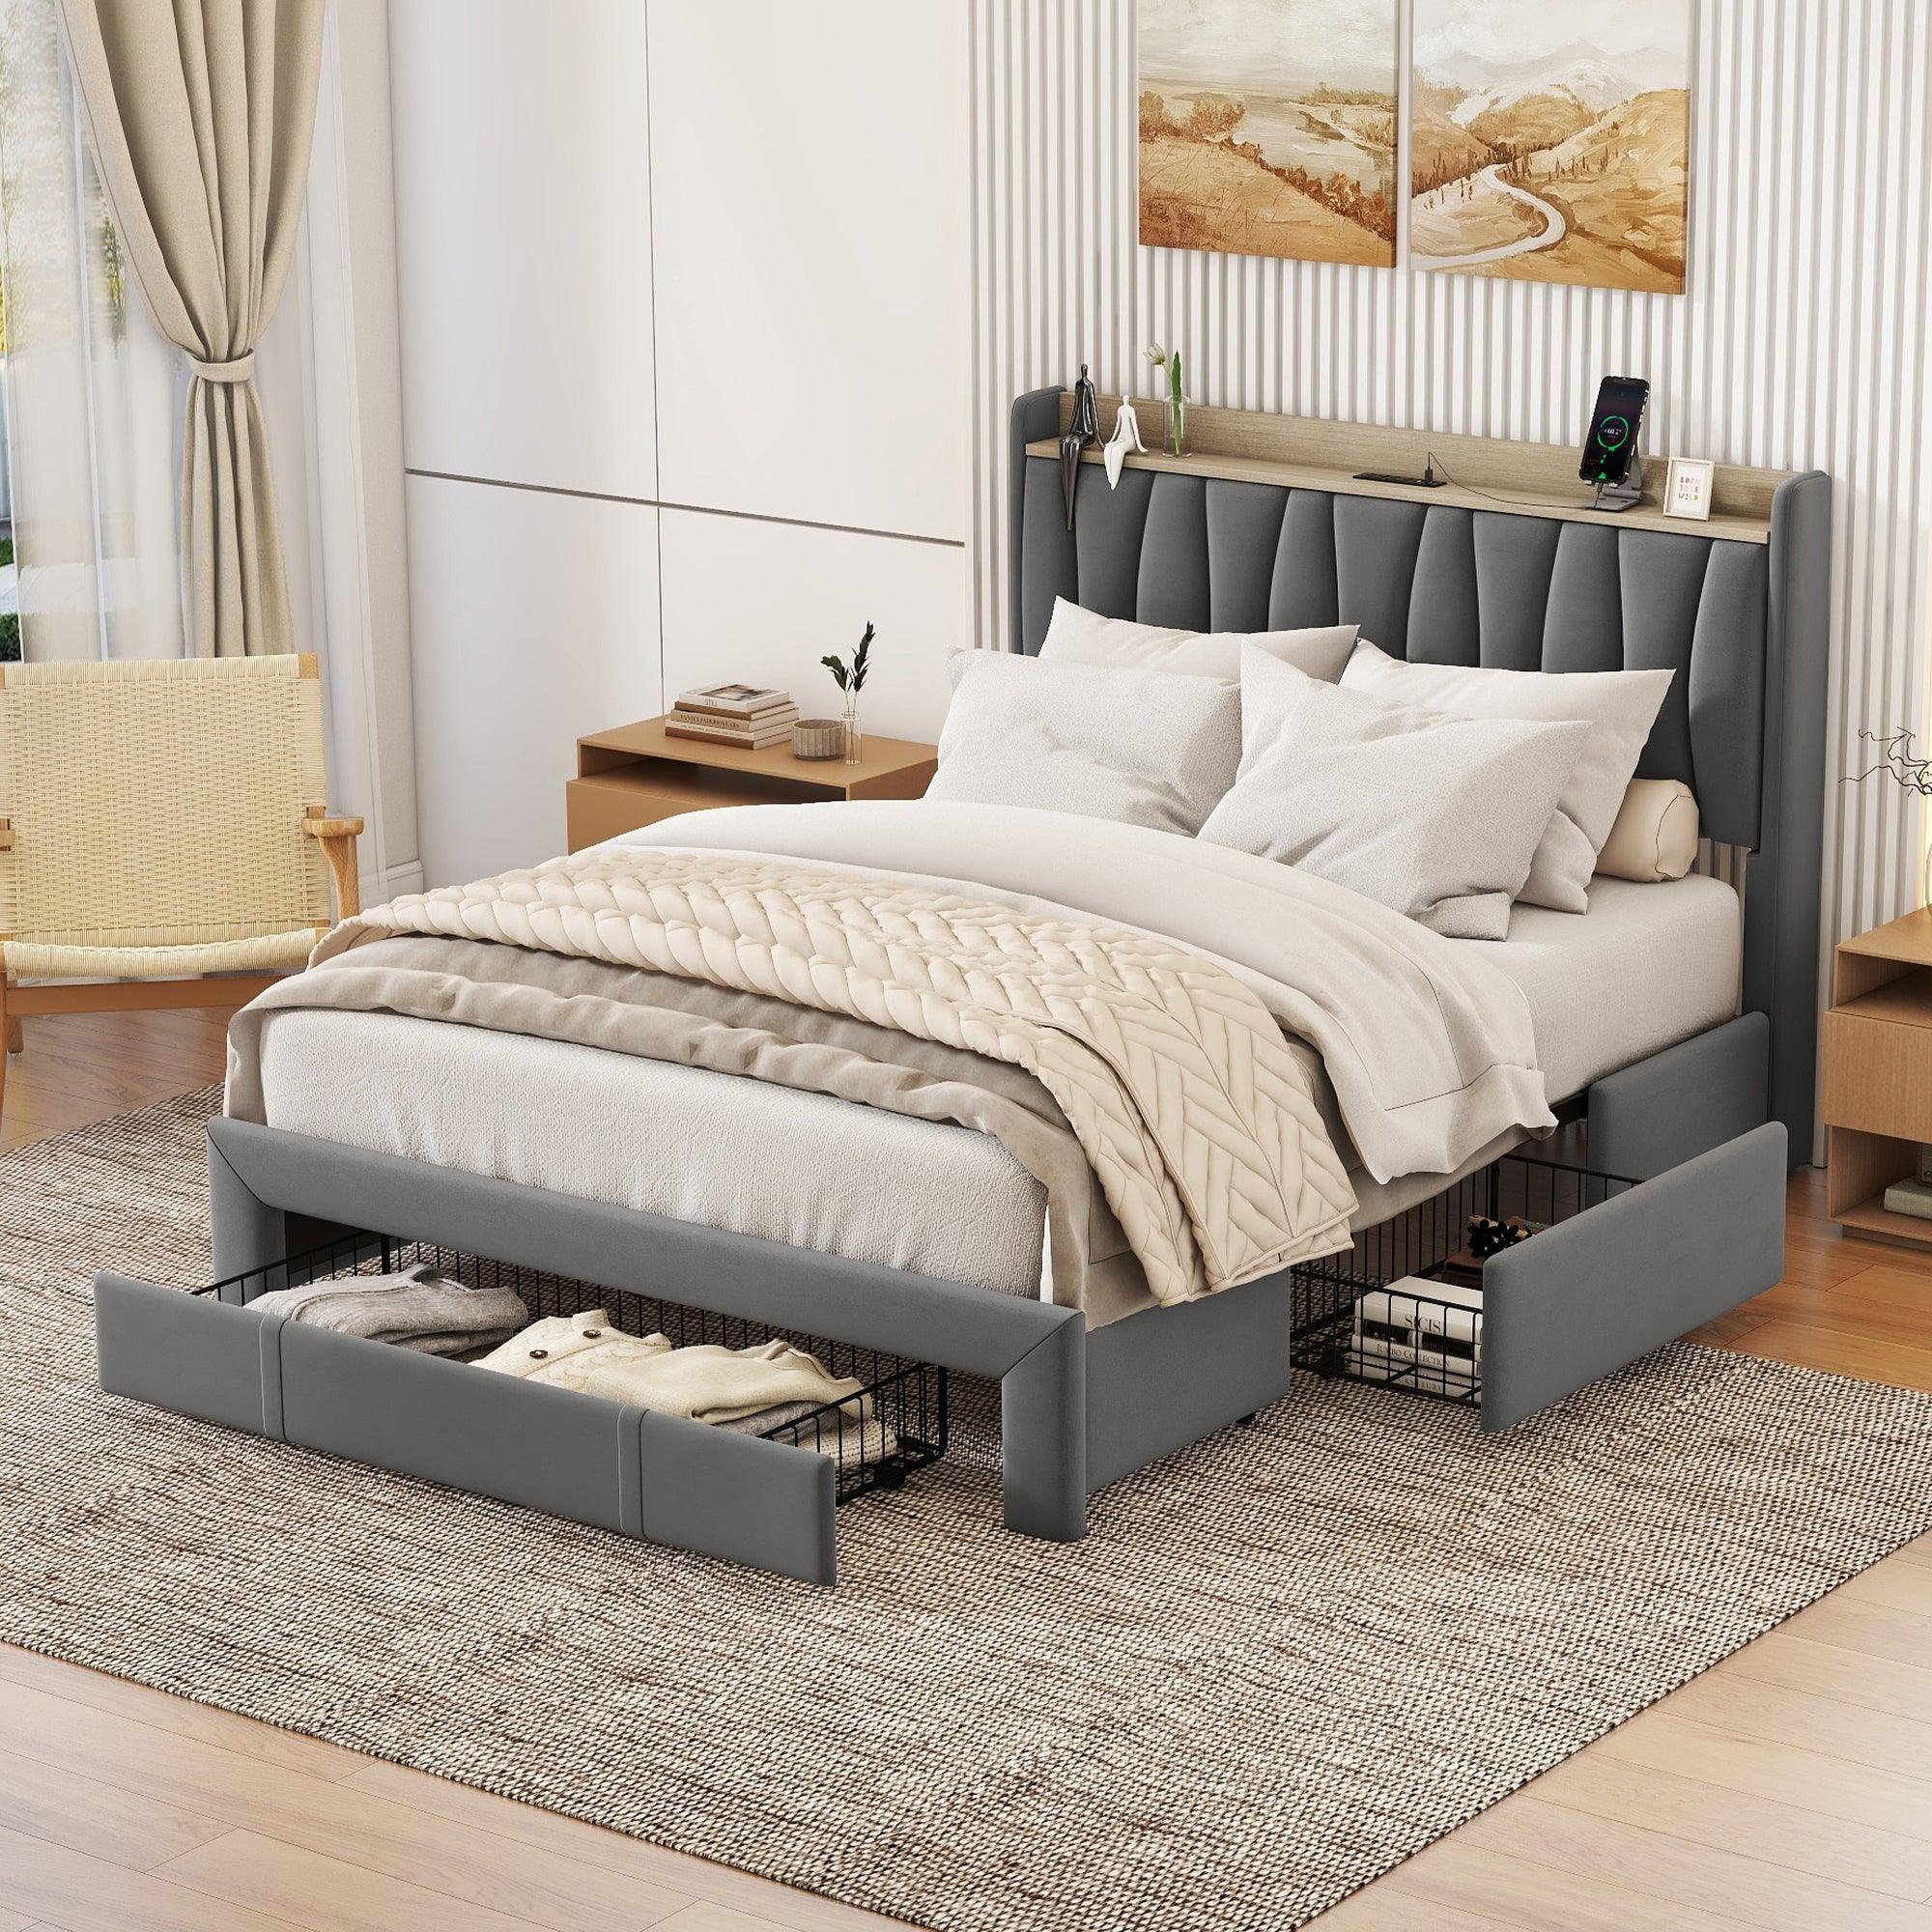 🆓🚛 Queen Size Bed Frame With Storage Headboard & Charging Station, Upholstered Platform Bed With 3 Drawers, No Box Spring Needed, Dark Gray